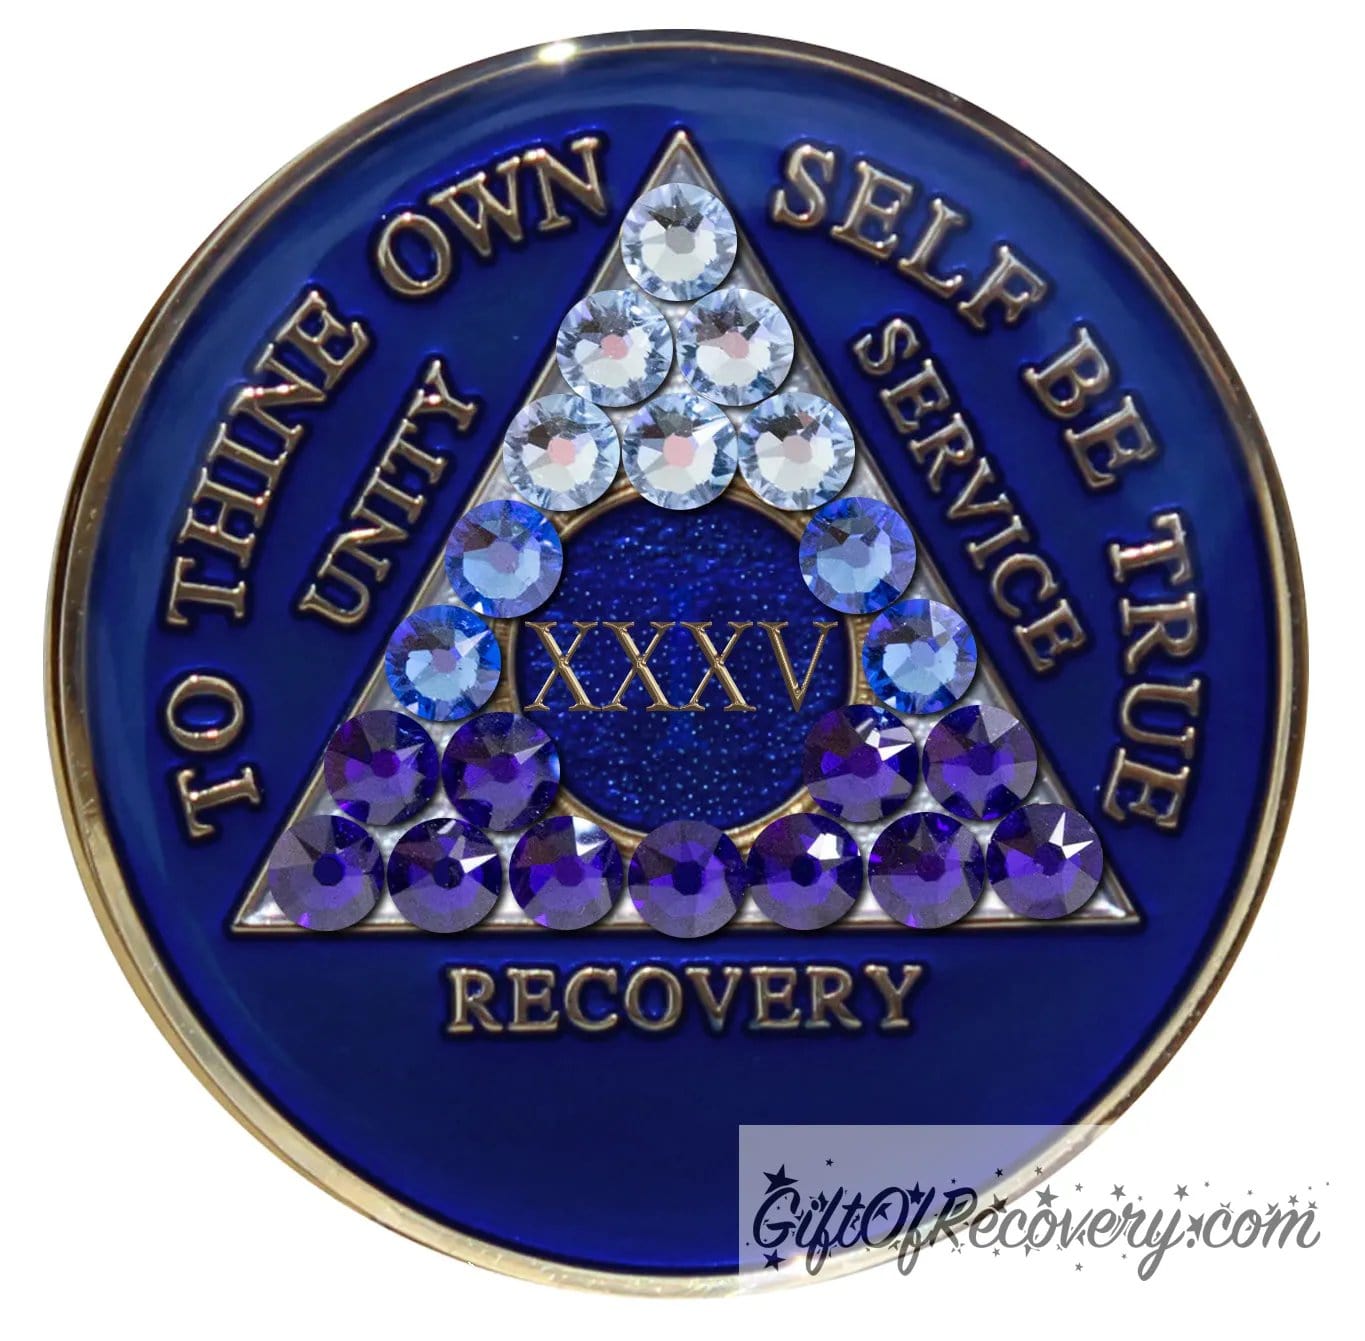 35 year Big Book Blue AA medallion with 21 genuine crystals forming the triangle, going from light to dark blue to represent transitions in your recovery journey, the center circle is blue sparkle, with the roman numeral, AA moto and rim in 14k gold plated brass and resin sealed for a glossy finish.